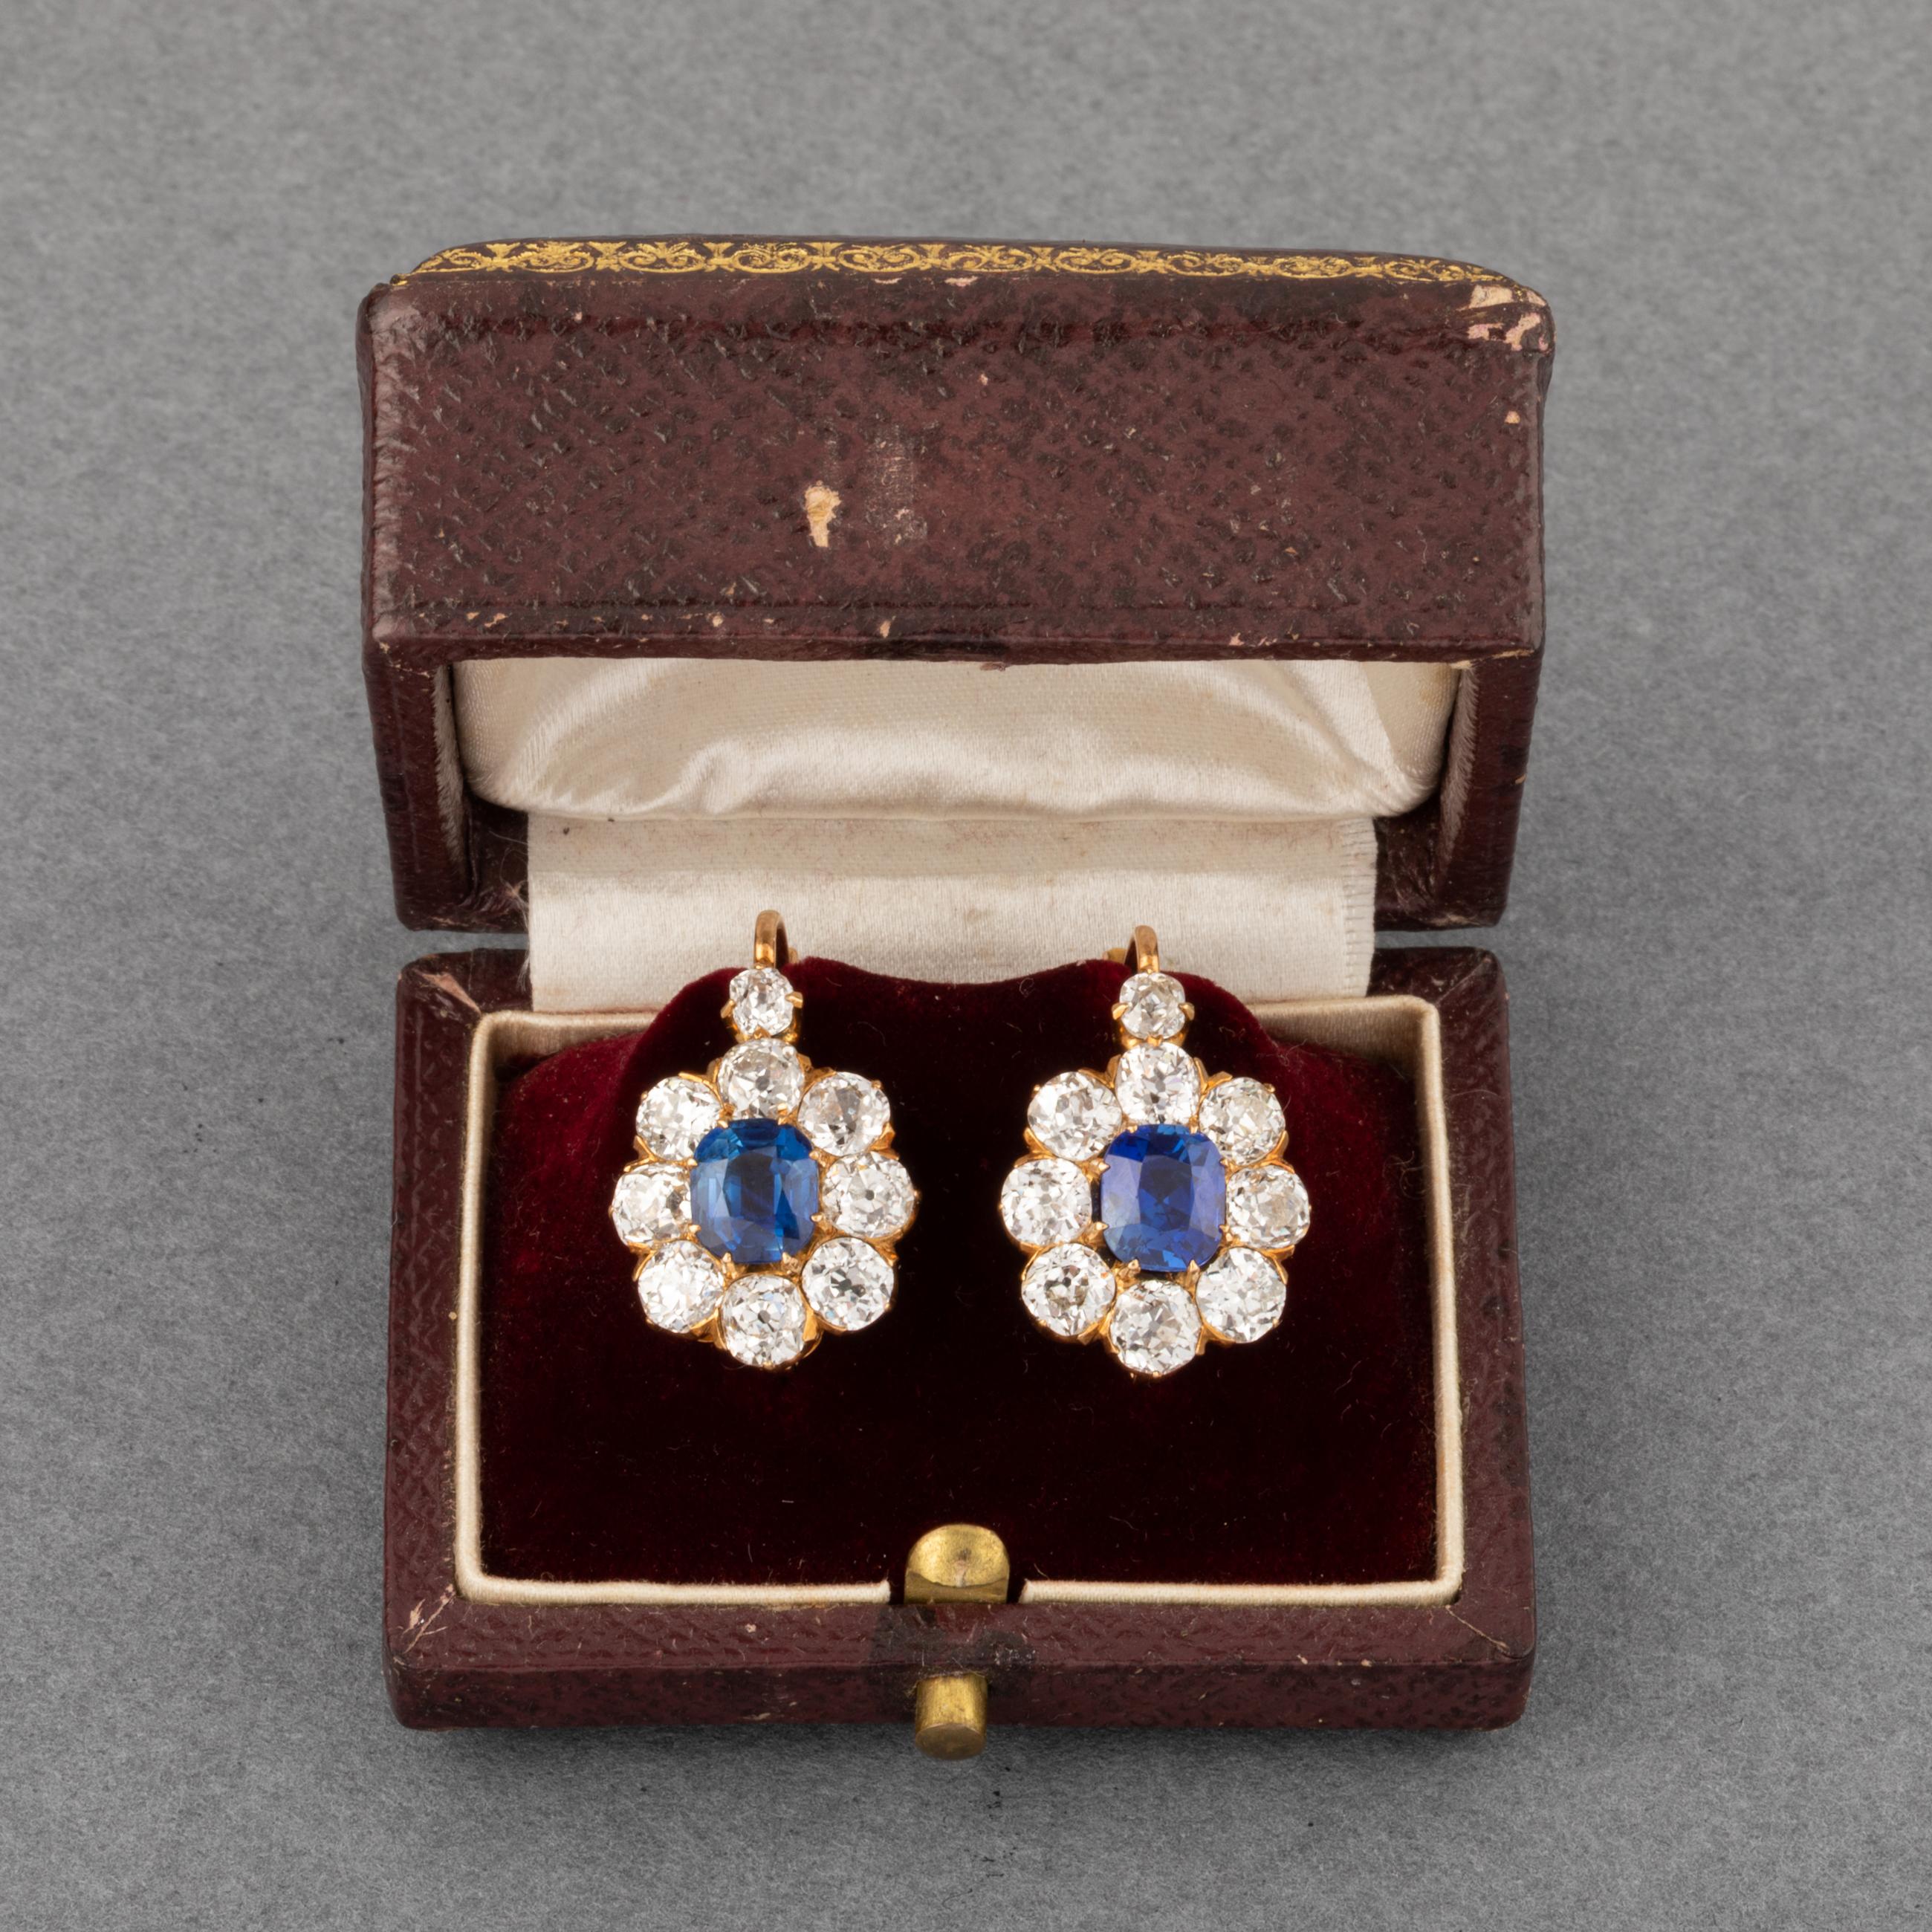 One very beautiful pair of antique French earrings, made circa 1890.

Made in yellow gold 18k. French antique hallmark for patent (CSGD).

The diamonds are quality Old European cut diamonds.

2.10 carats of diamonds per earrings, the diamonds